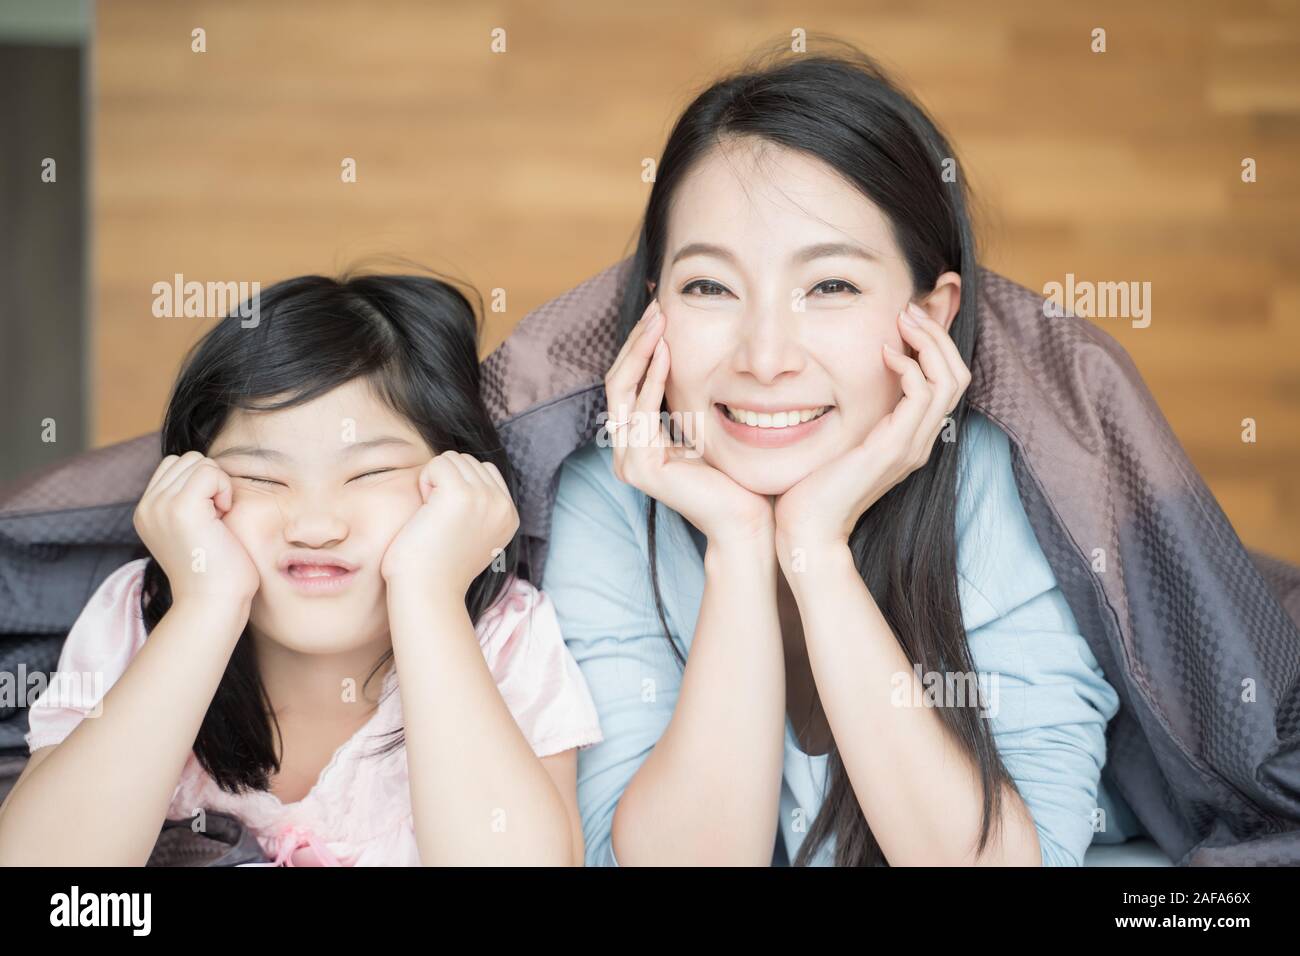 Mother and her daughter child girl playing in the bedroom and putting blanket on . Happy Asian family Stock Photo